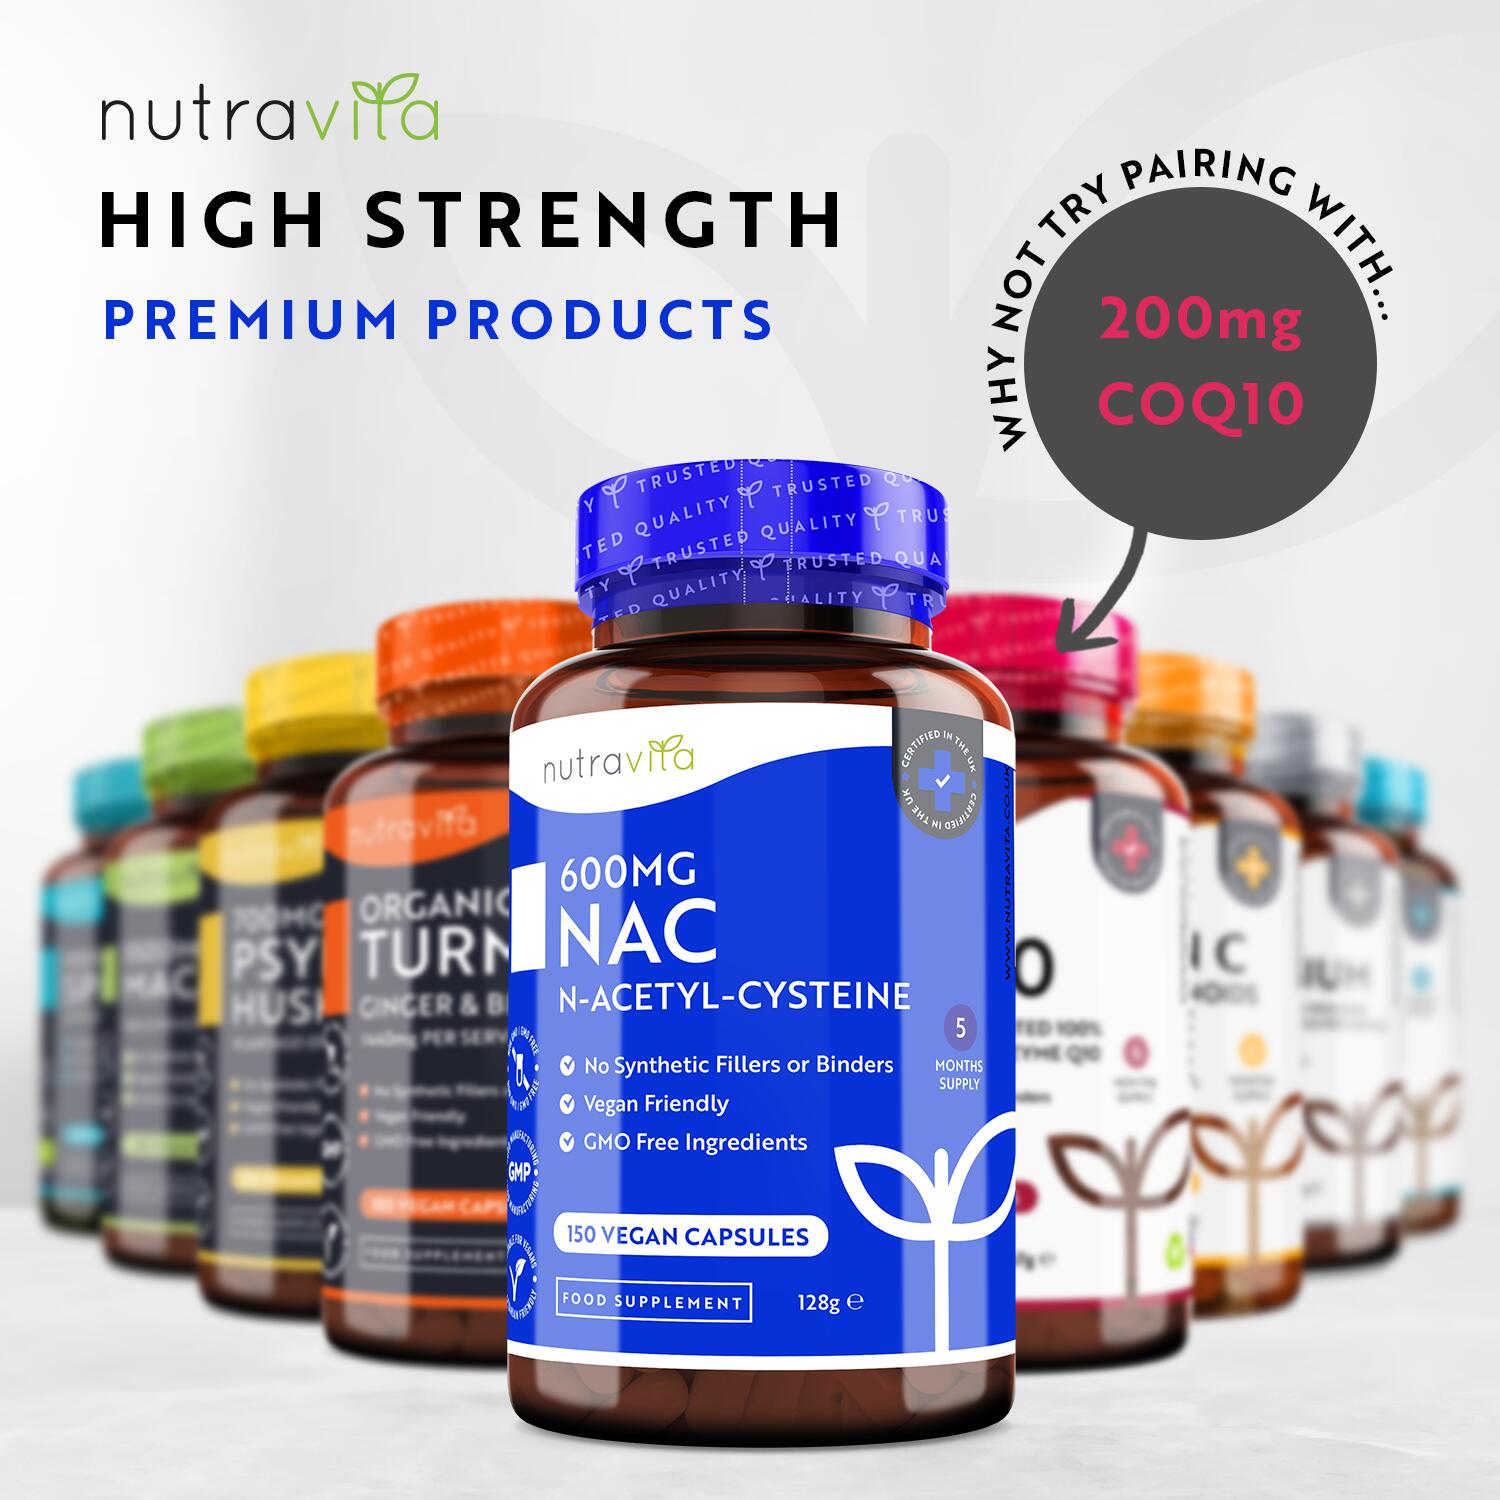 NAC is a stable form of amino acid, L-Cysteine which is in high-protein foods 6/6